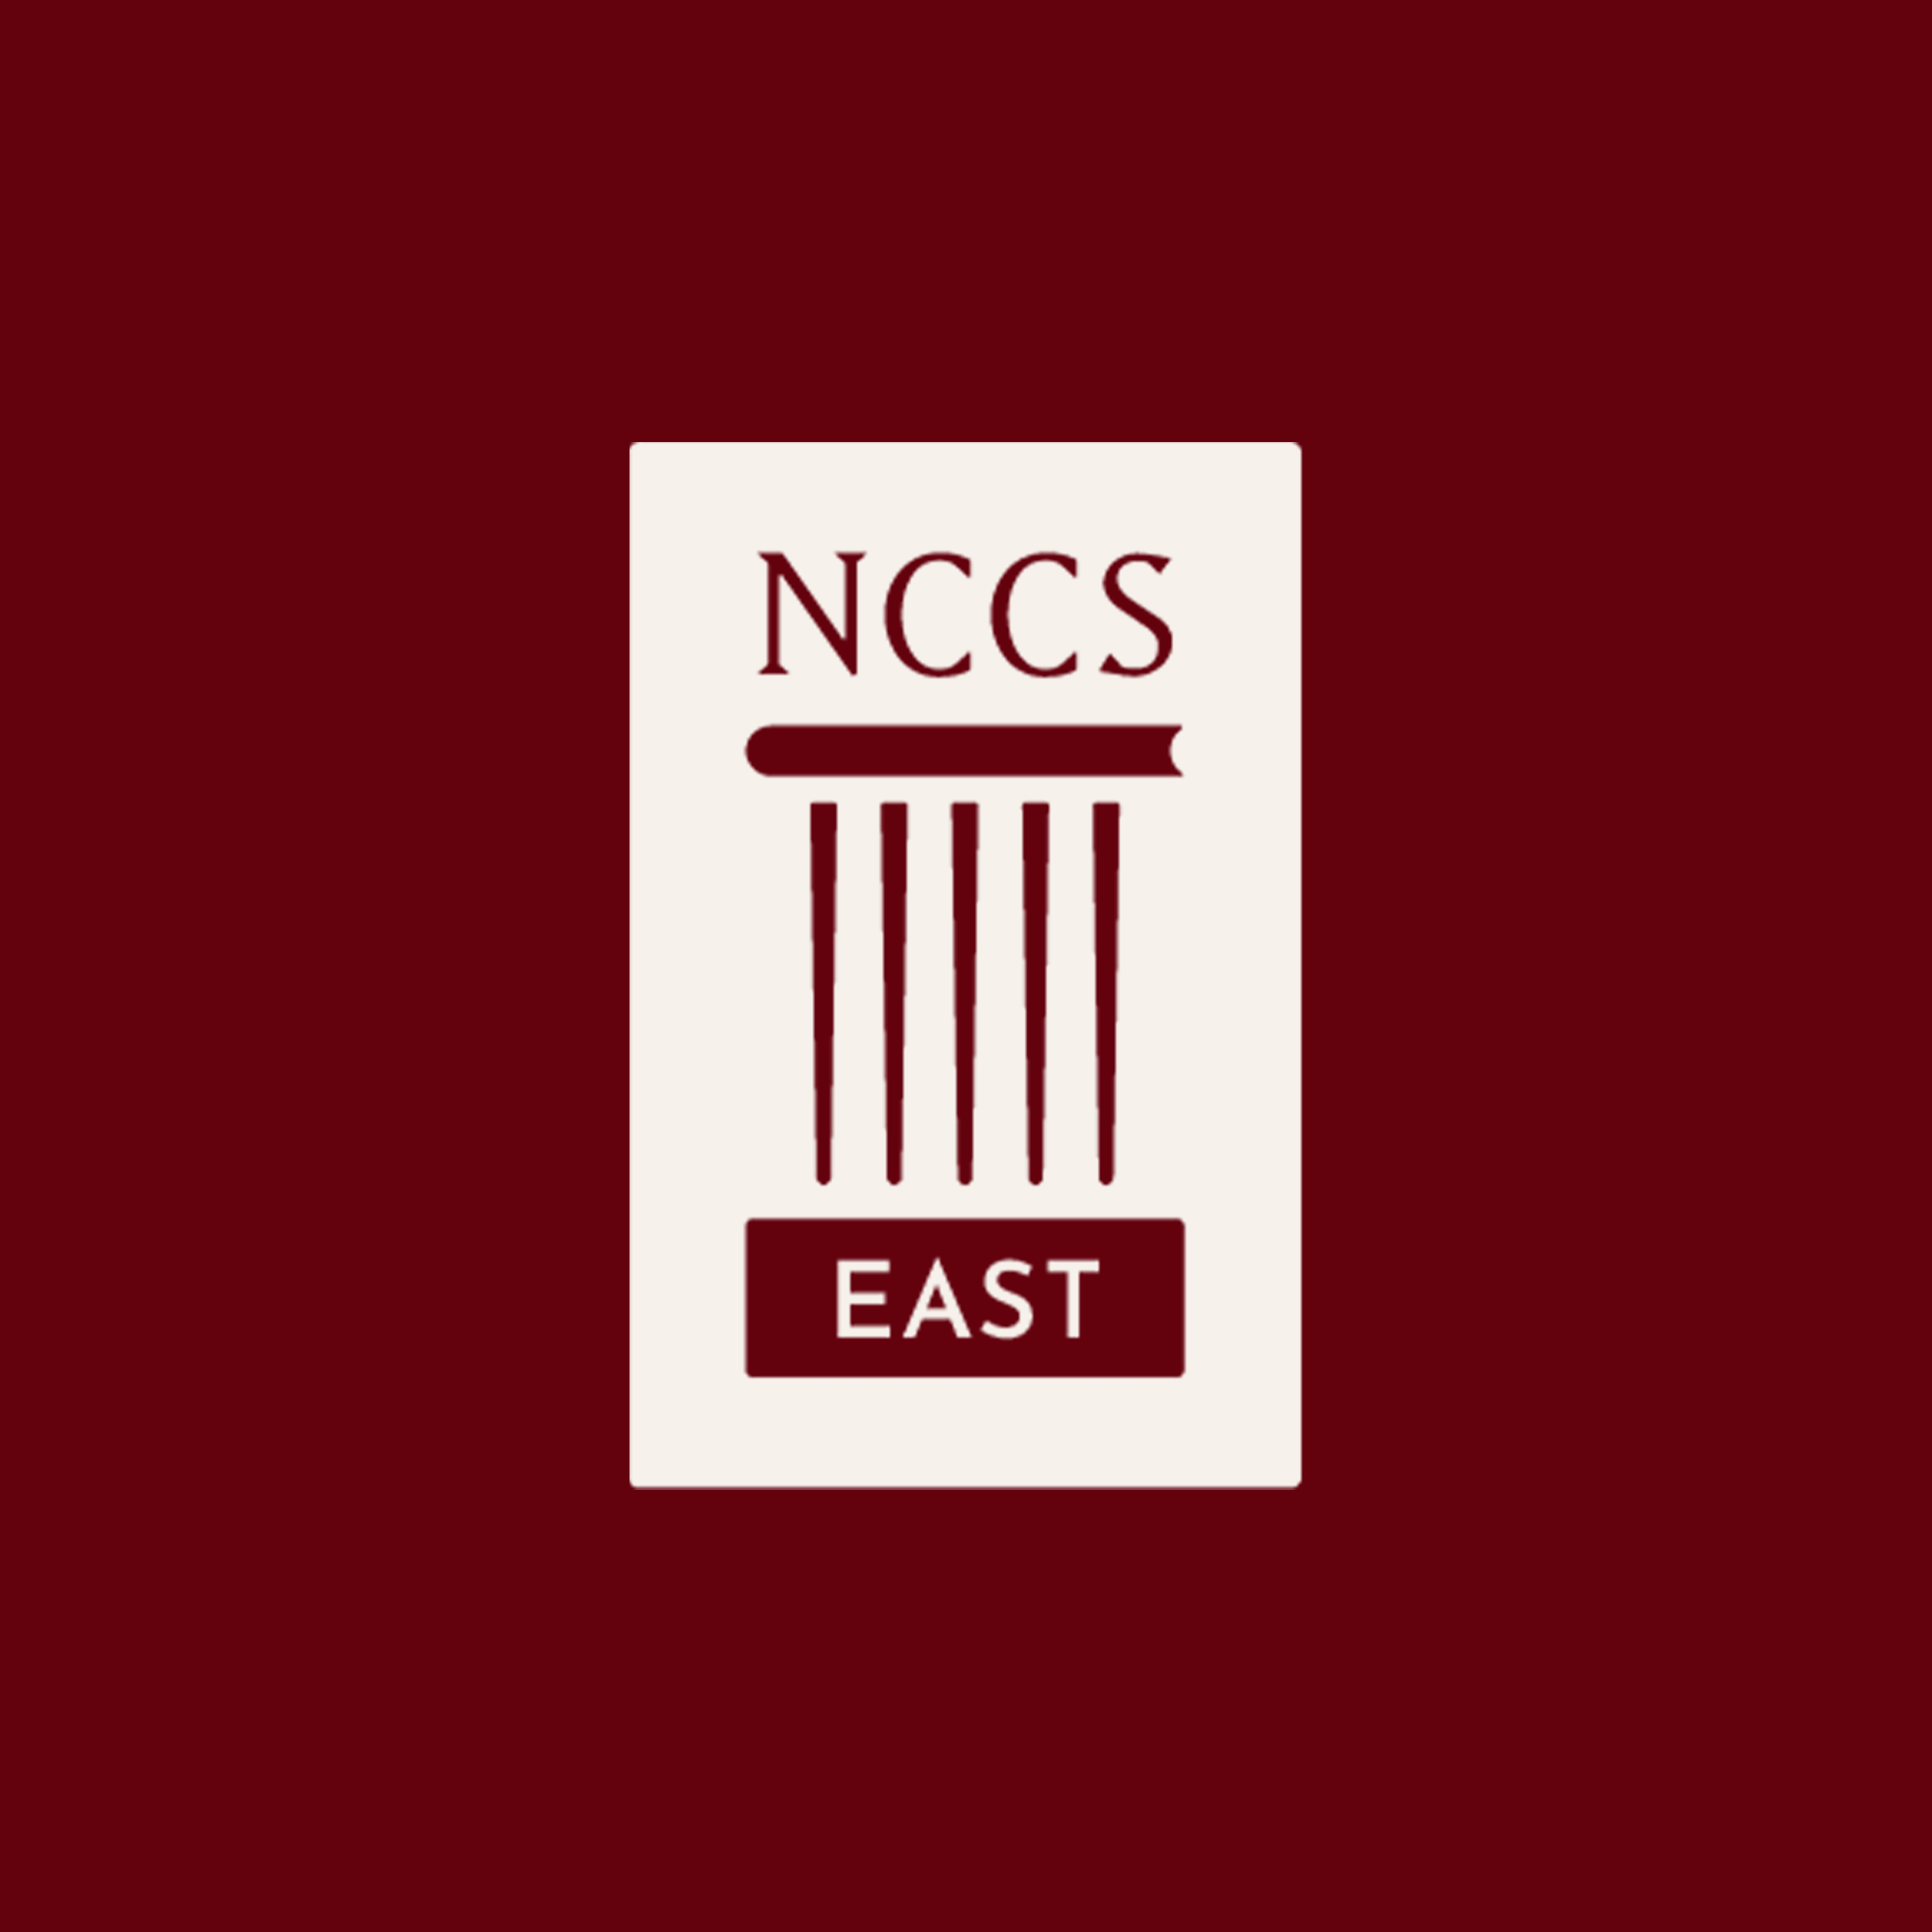 No Picture placeholder, NCCS East badge logo on maroon background